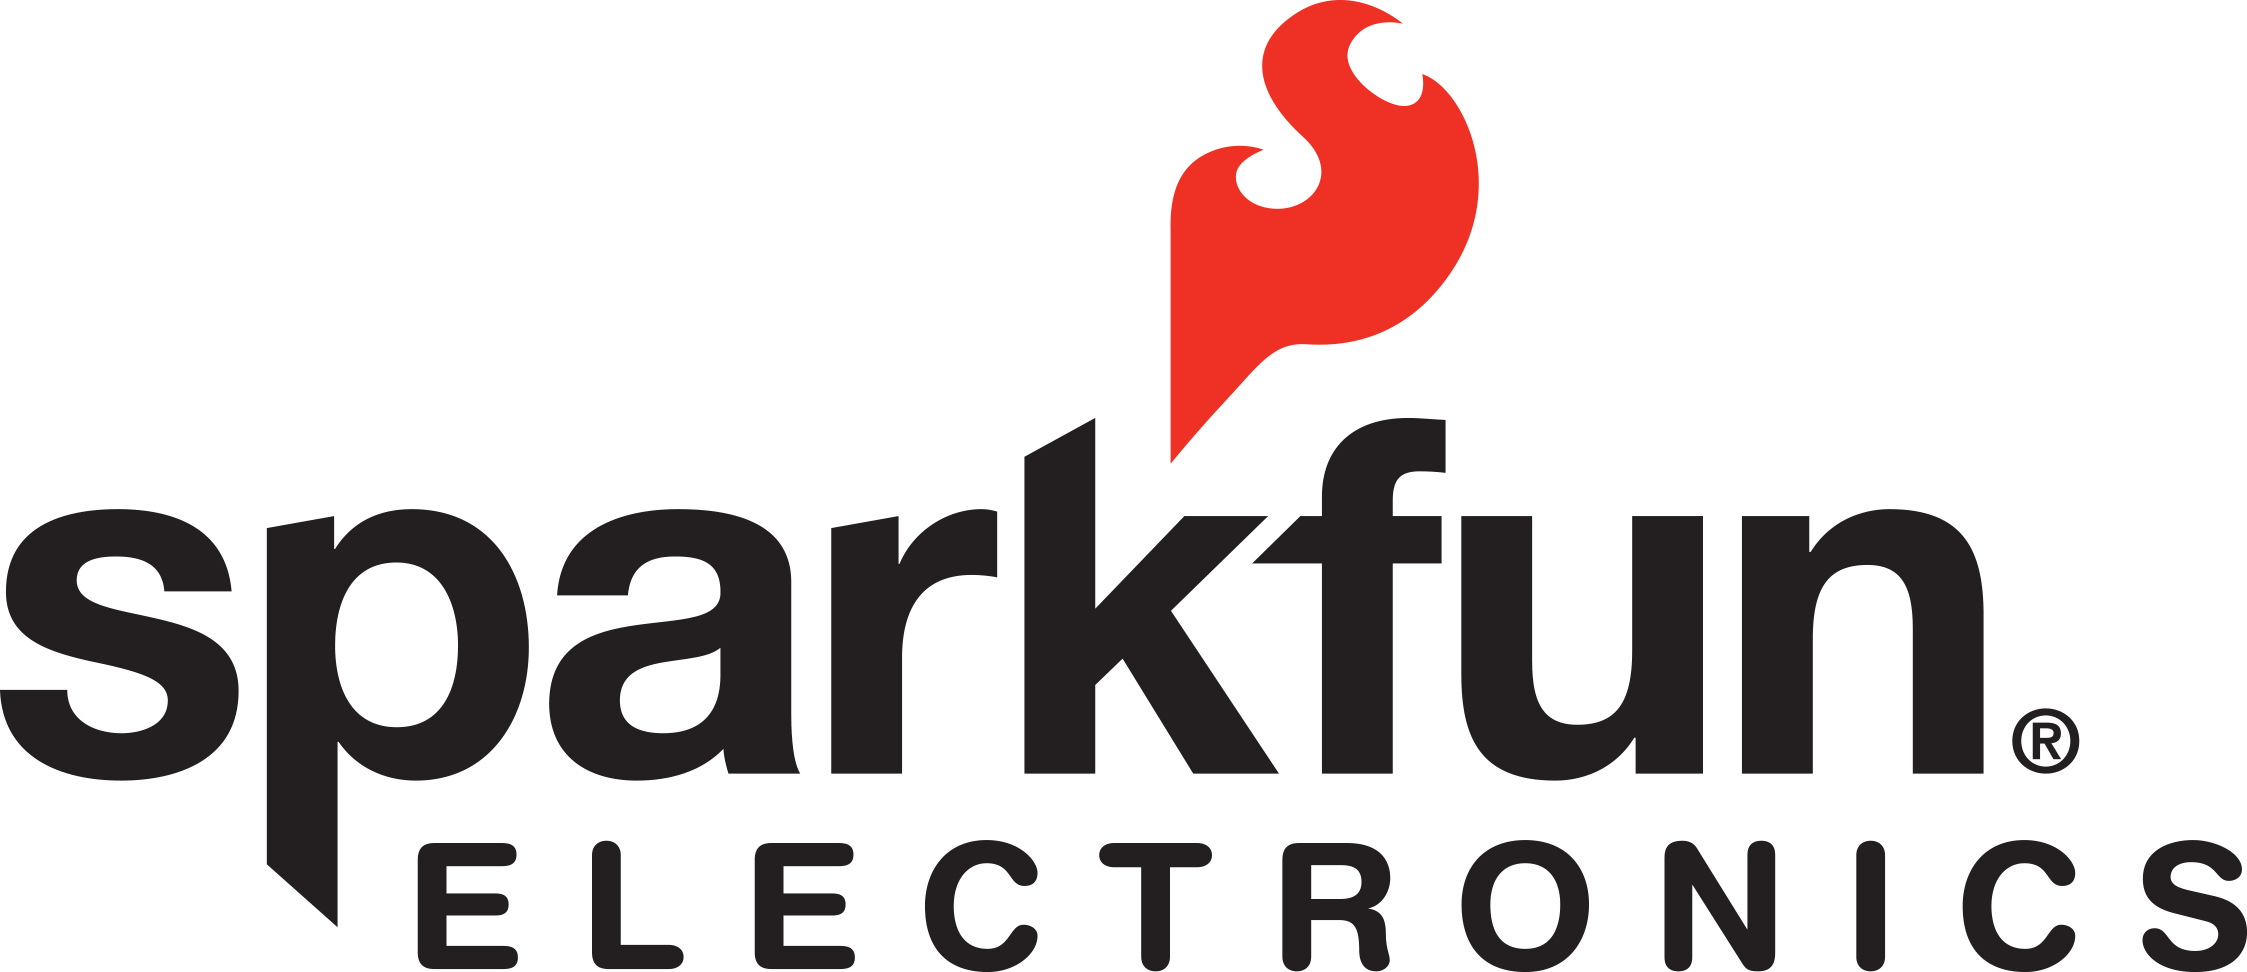 /images/brand/sparkfun.png